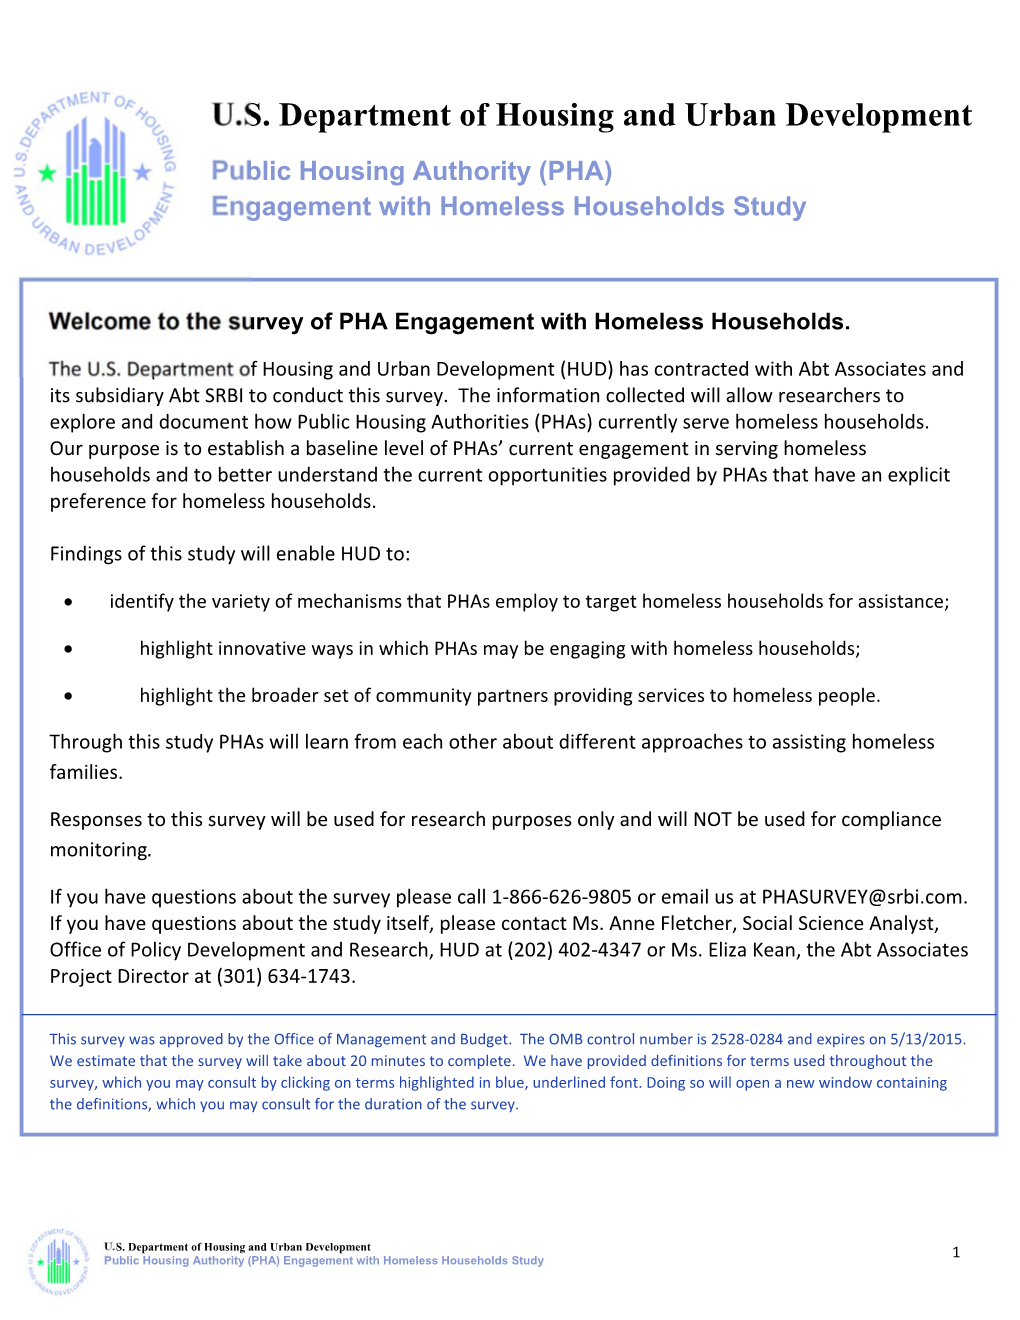 Public Housing Authority (PHA) Engagement with Homeless Households Study